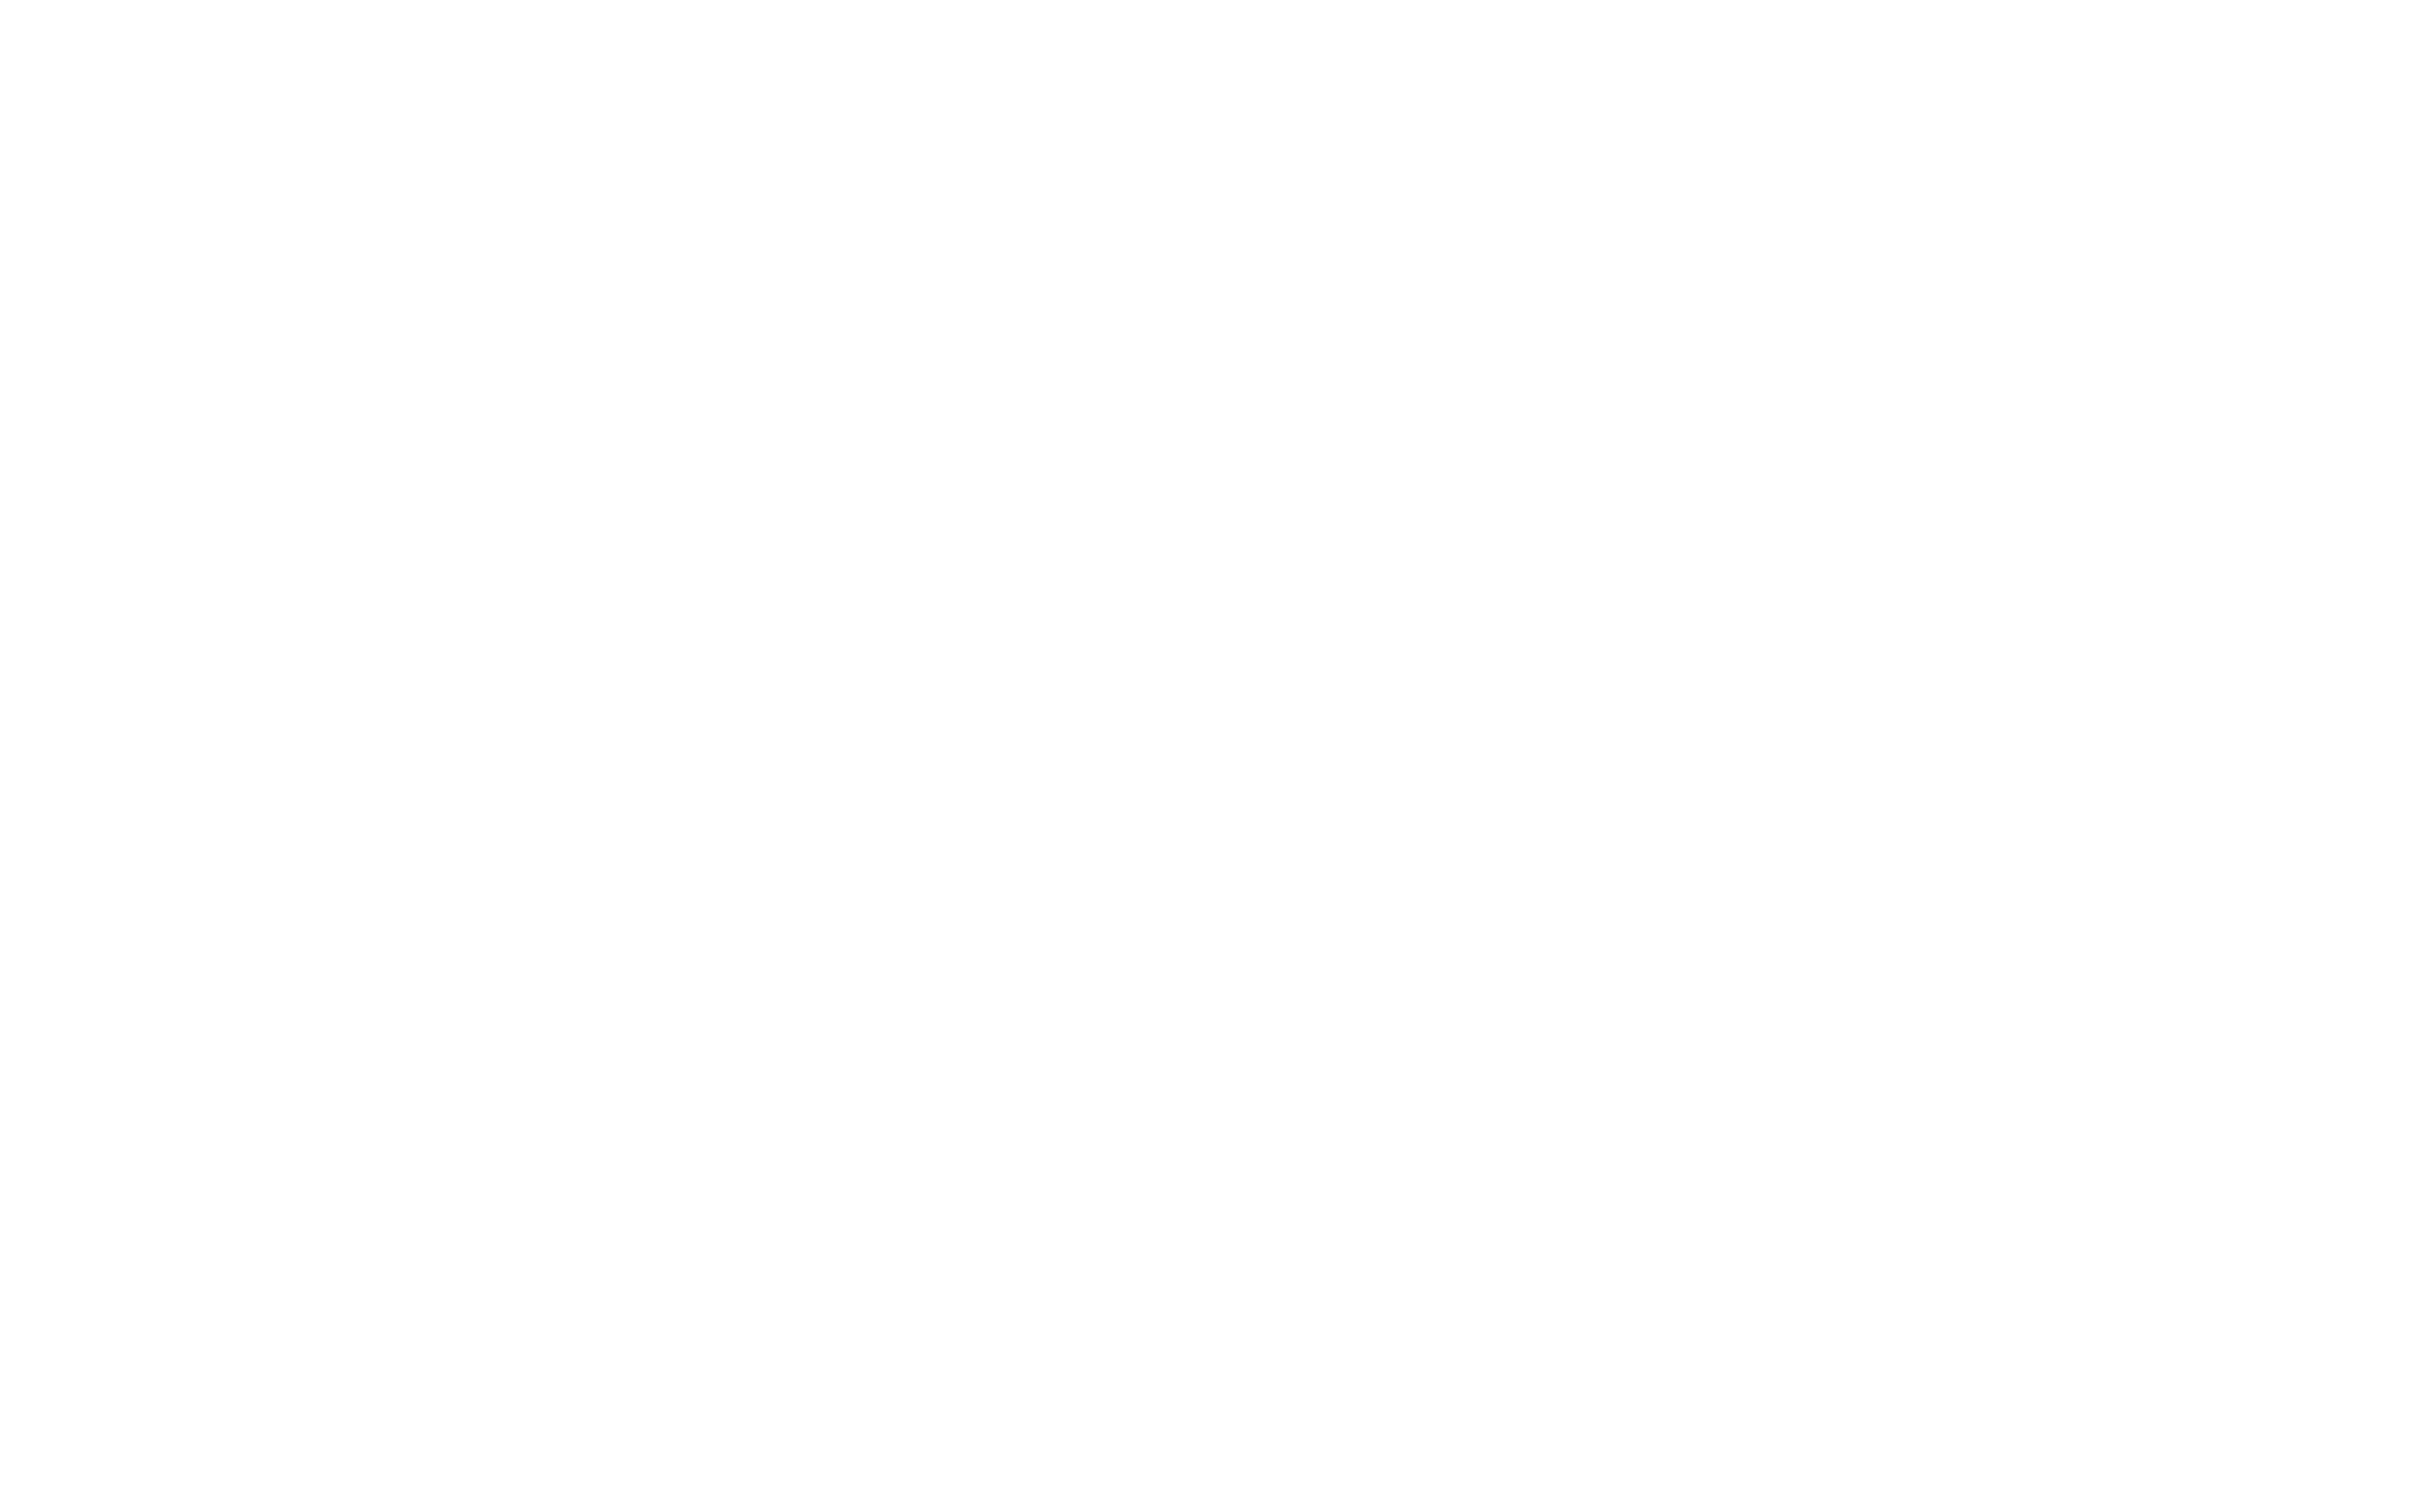 The Sacred Space